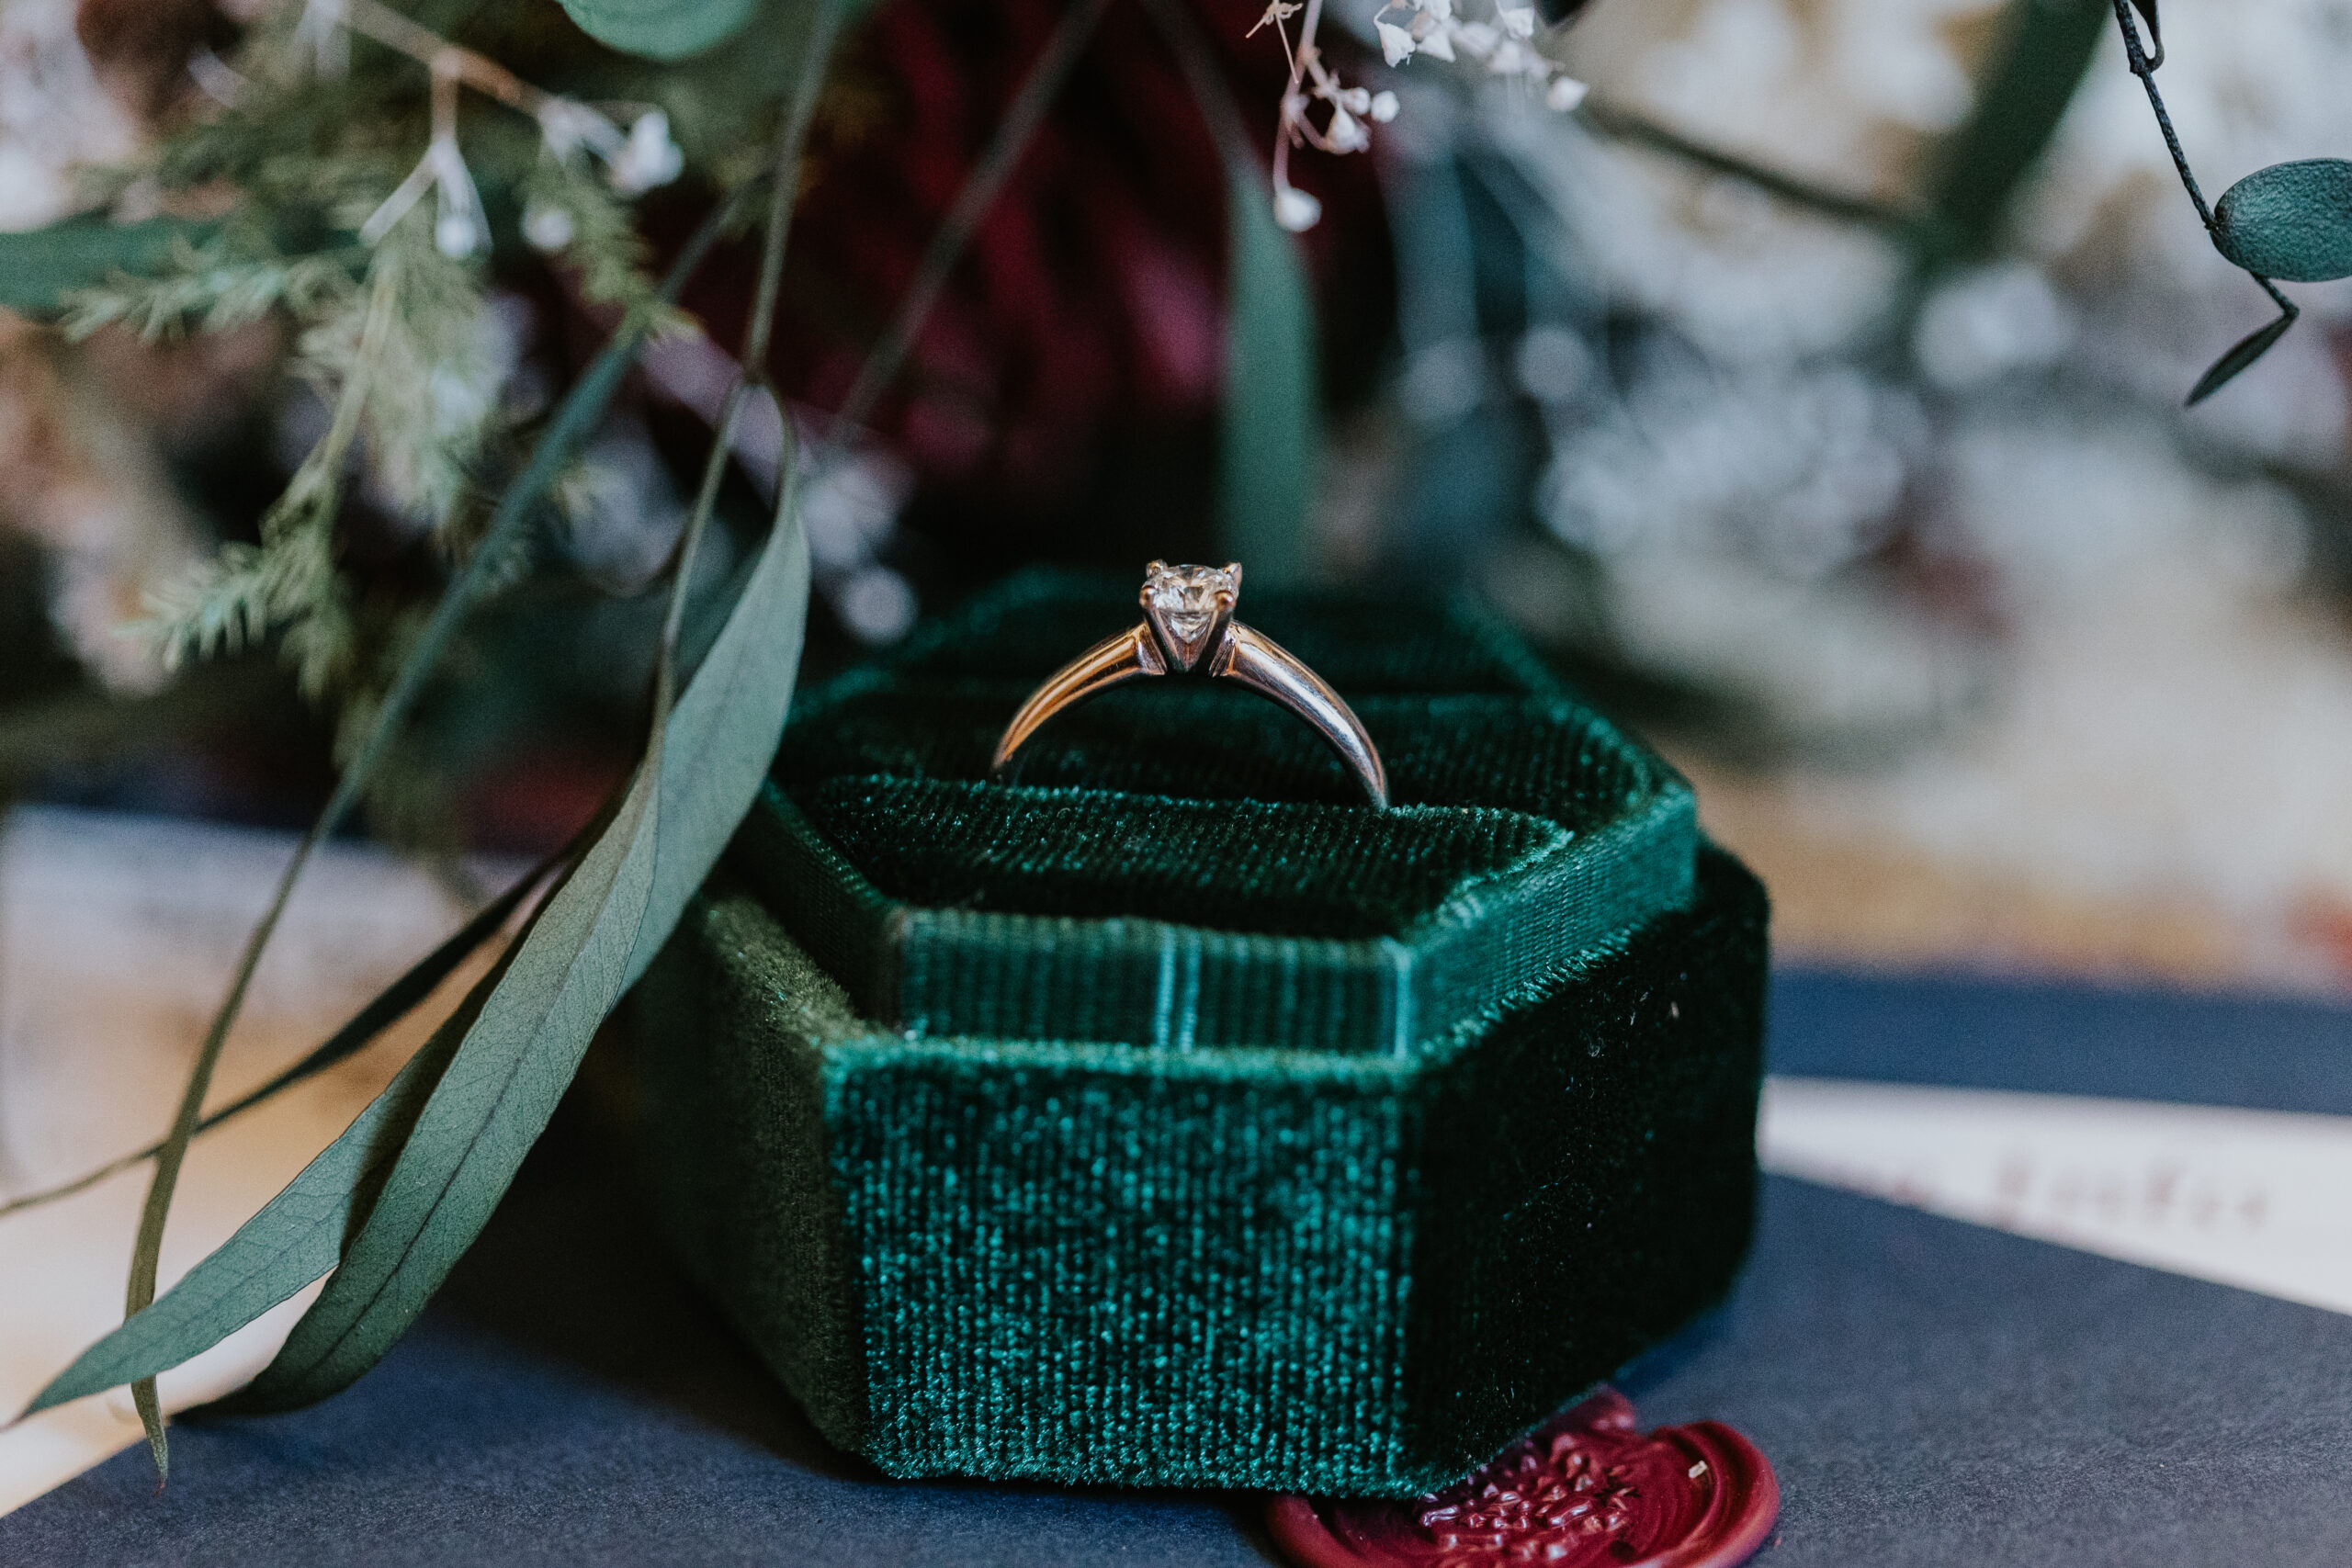 macro shot of a wedding ring in a box surrounded by wedding floral arrangements